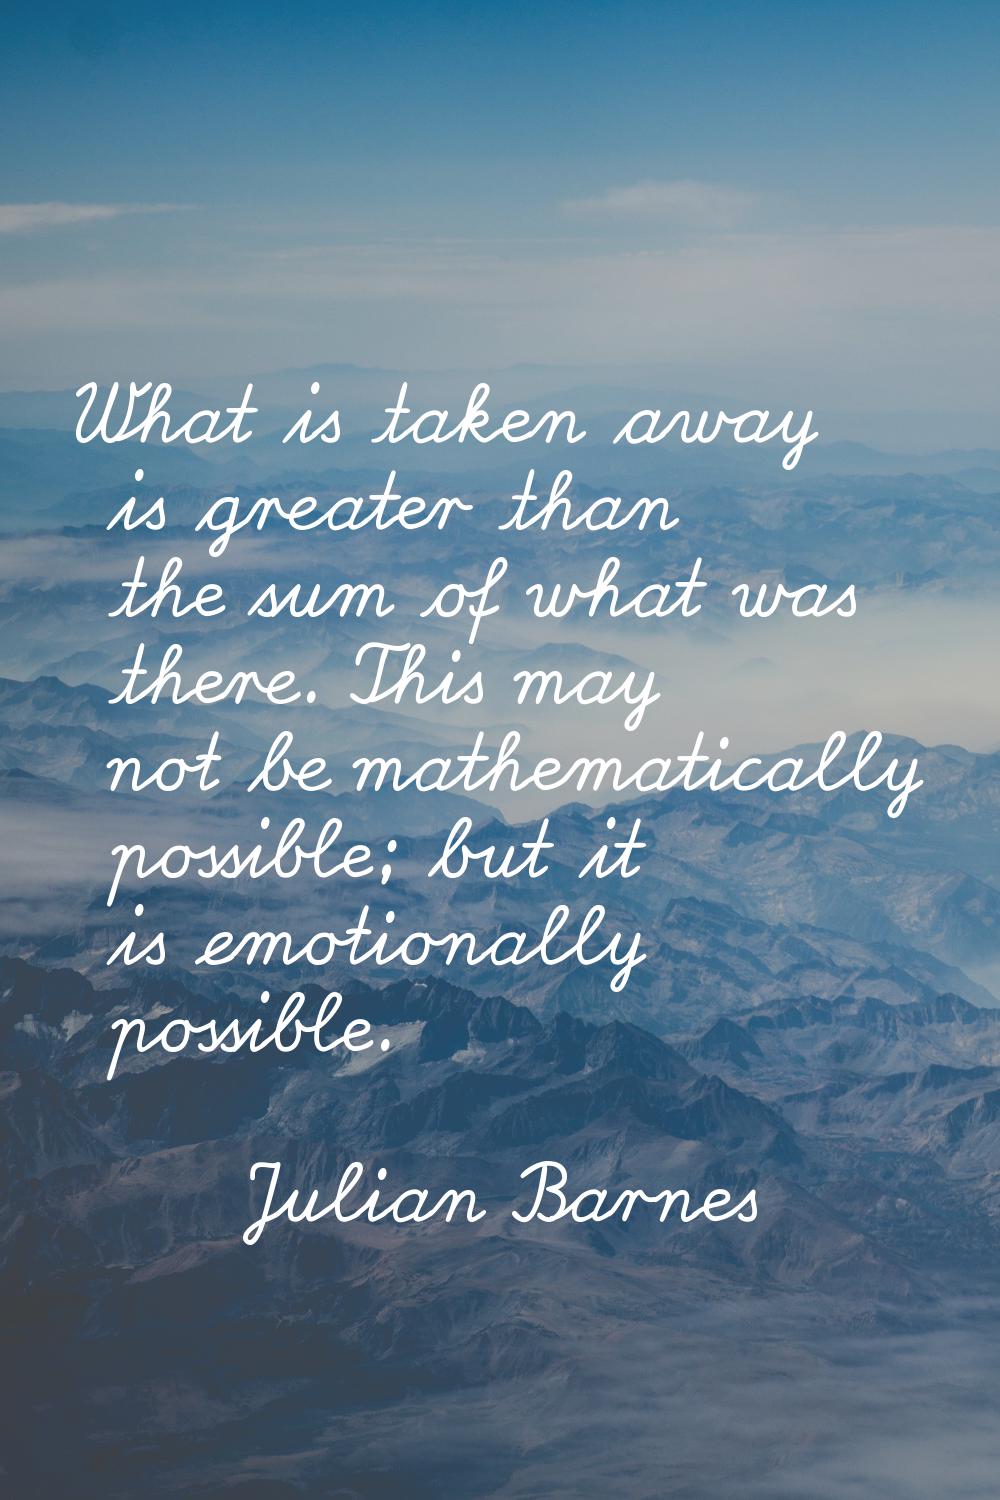 What is taken away is greater than the sum of what was there. This may not be mathematically possib